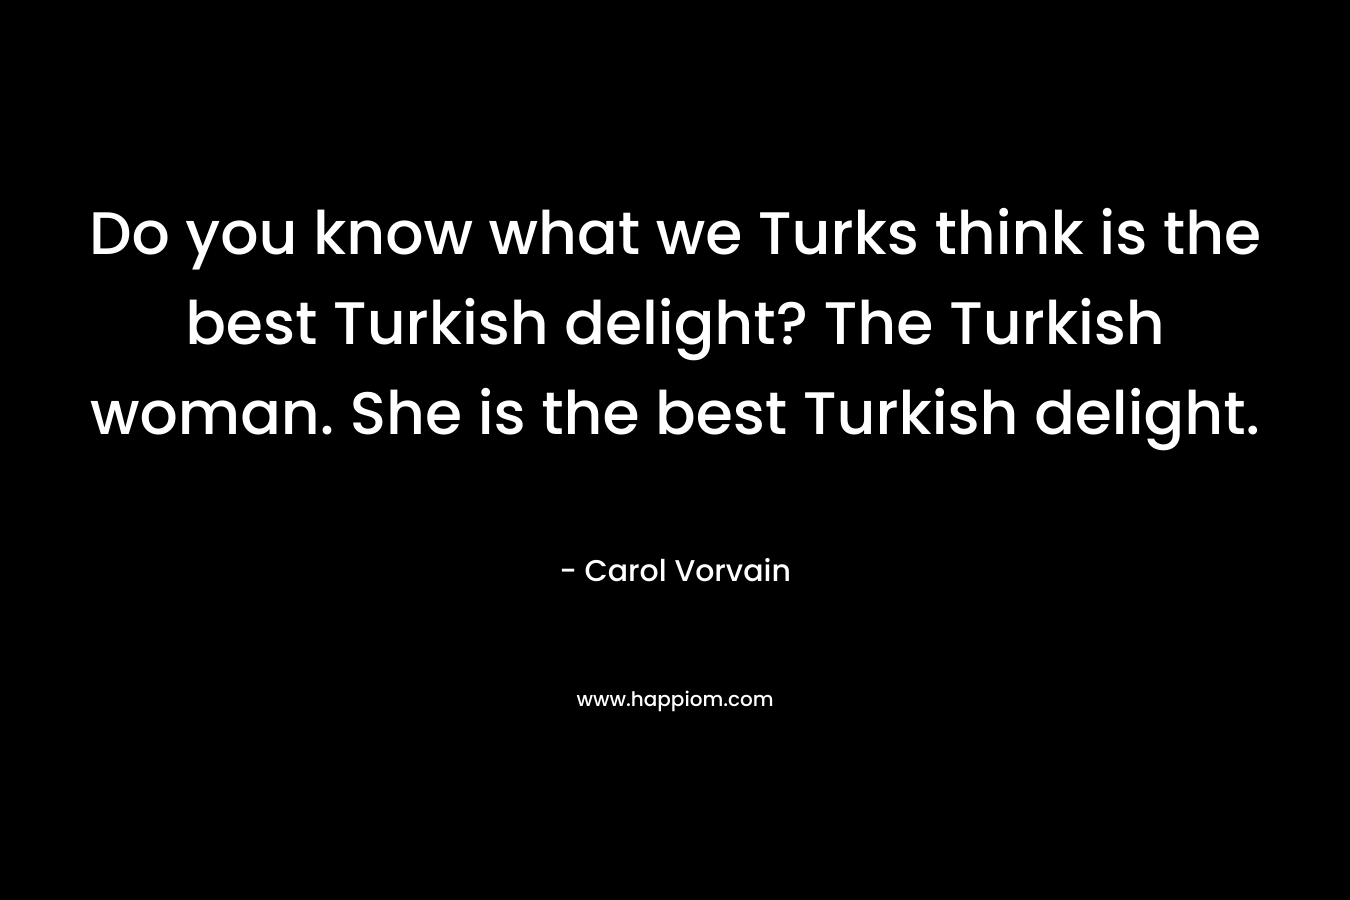 Do you know what we Turks think is the best Turkish delight? The Turkish woman. She is the best Turkish delight.